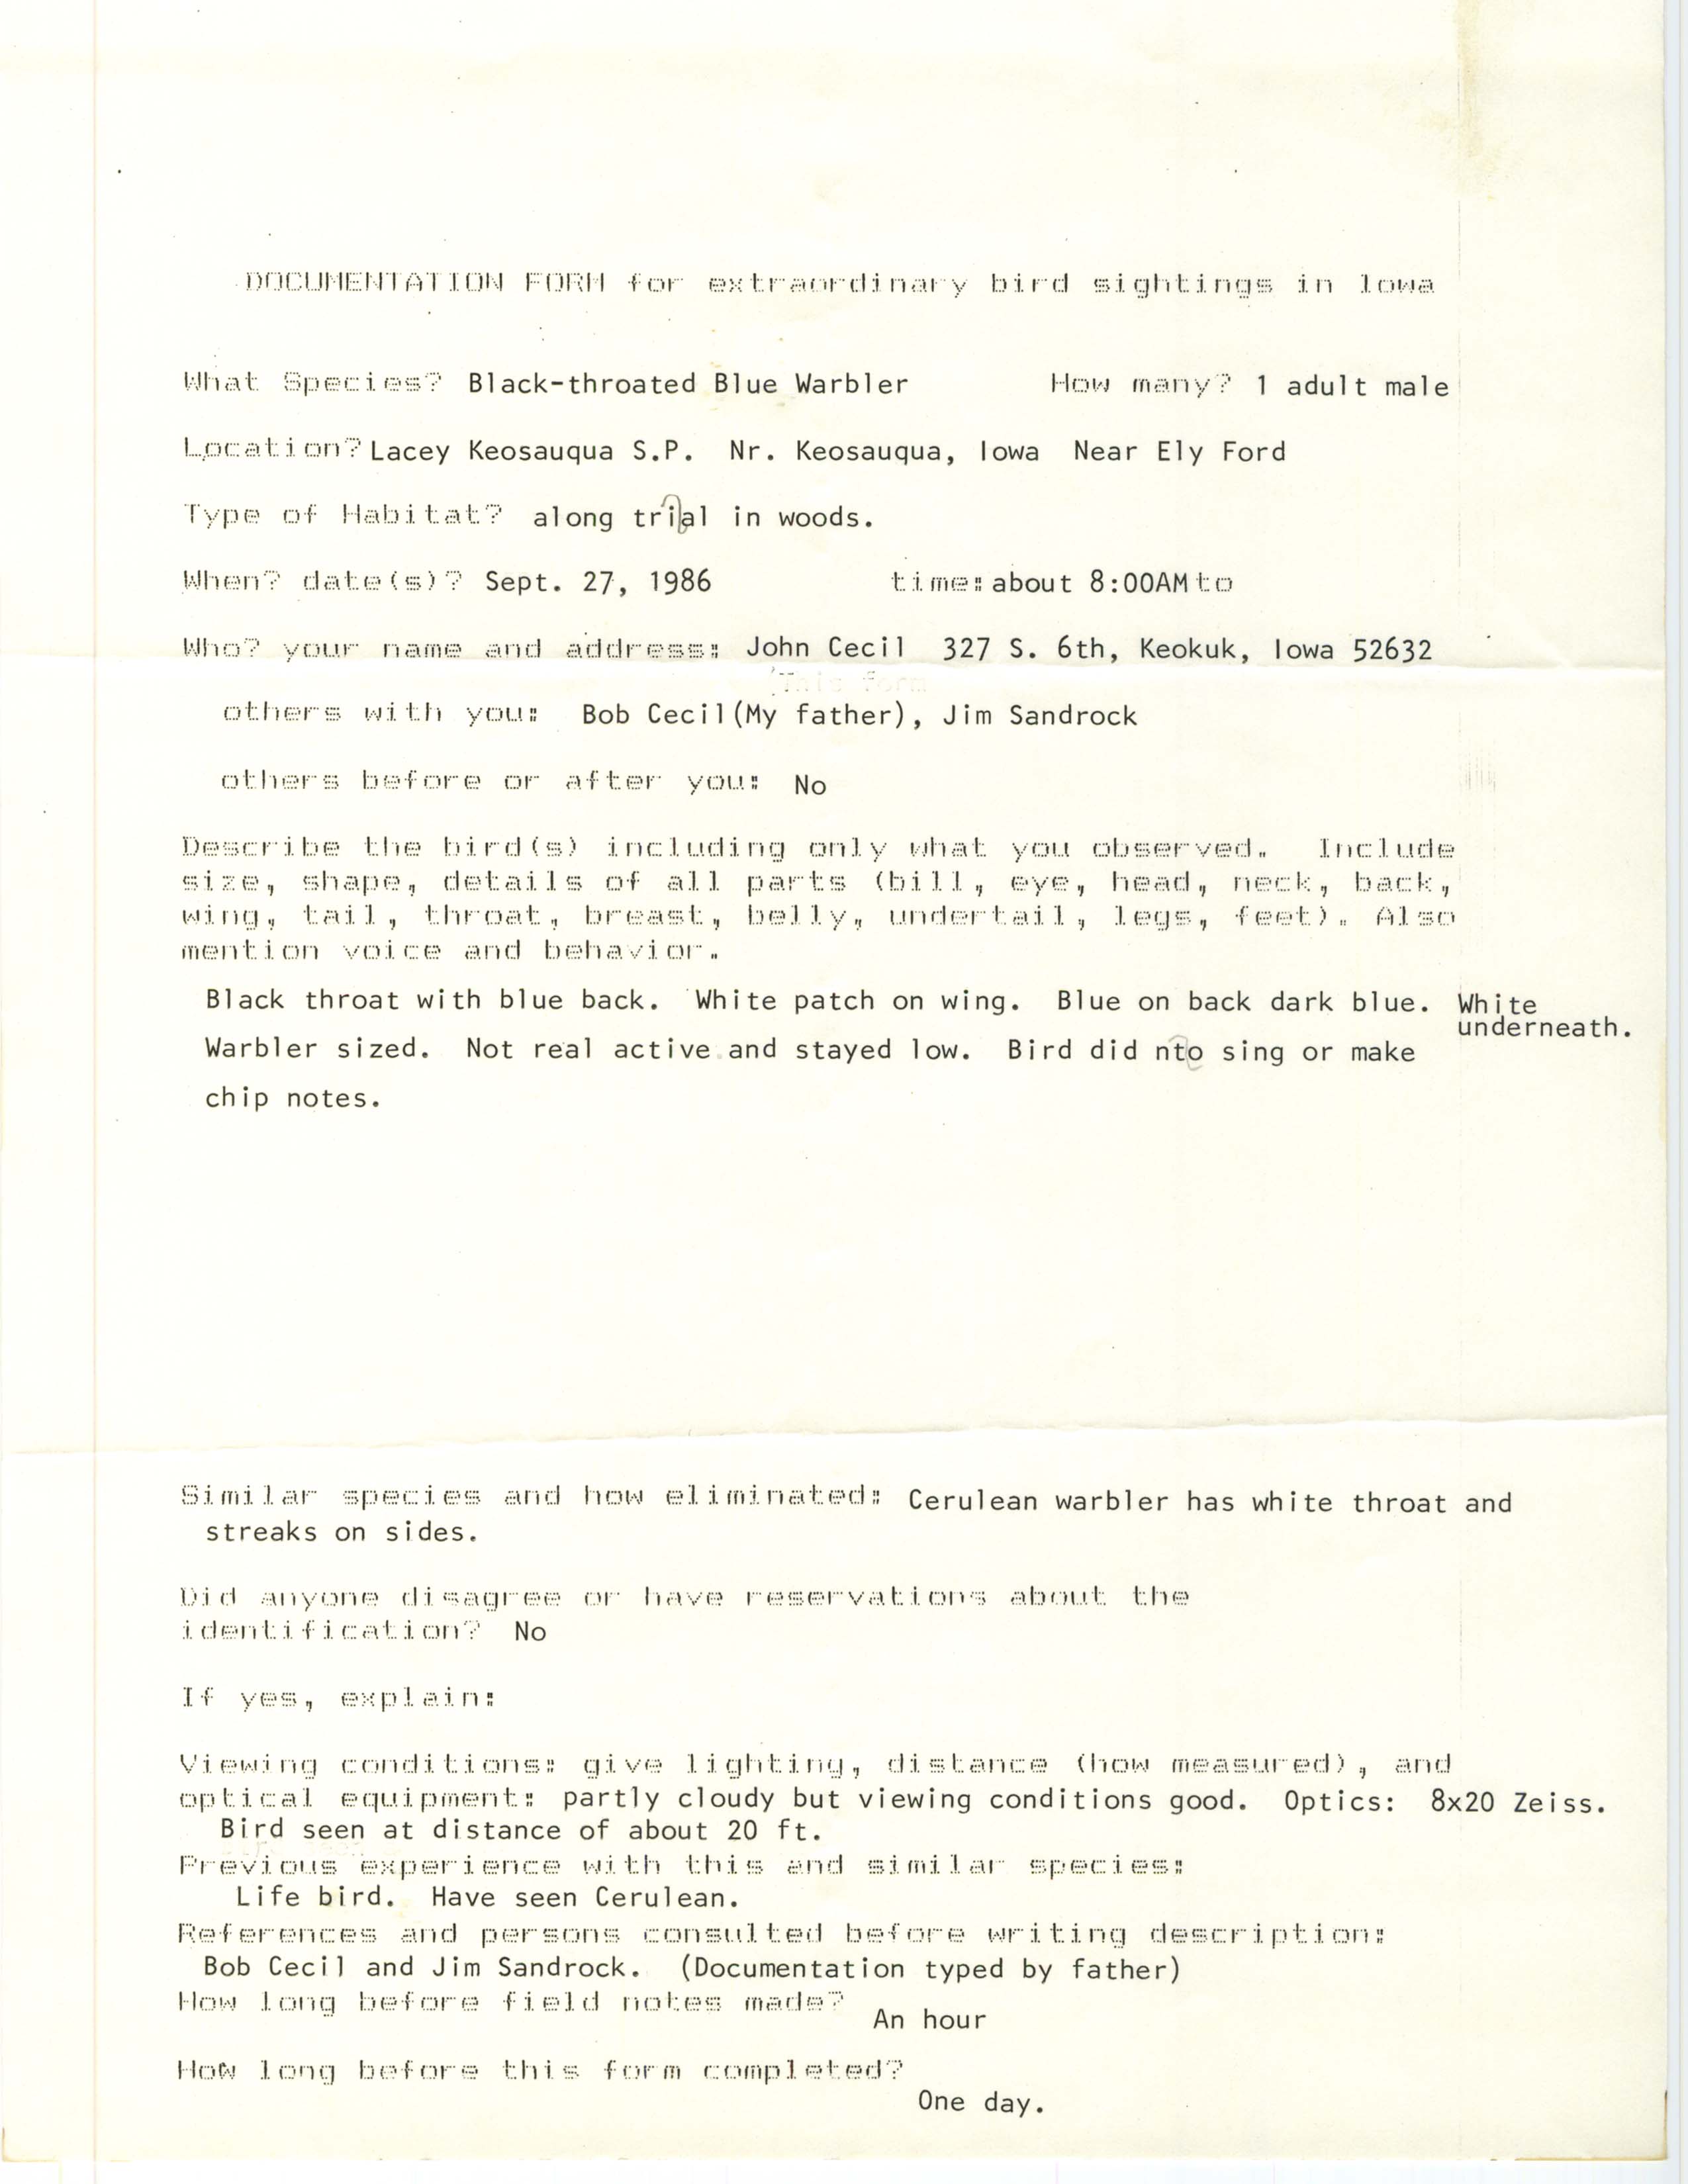 Rare bird documentation form for Black-throated Blue Warbler at Lacey-Keosauqua State Park, 1986